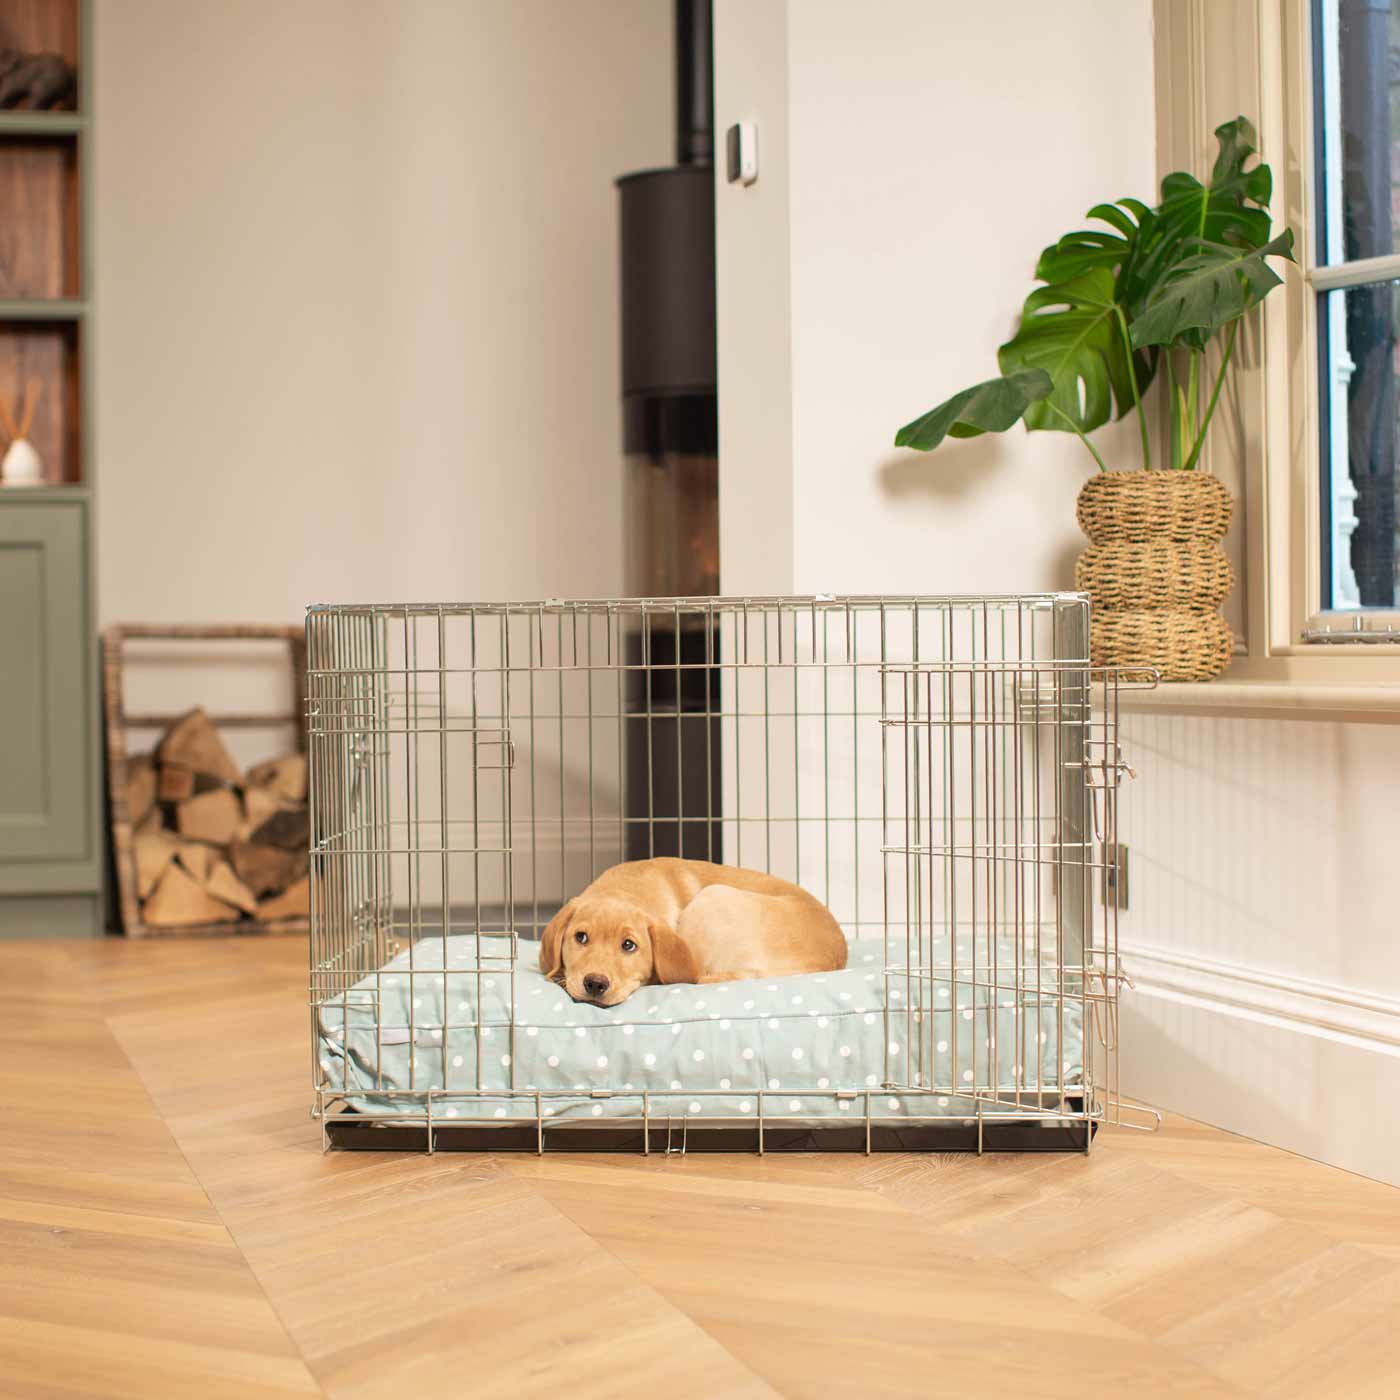 Luxury Dog Cage Cushion, Duck Egg Spot Cage Cushion The Perfect Dog Cage Accessory, Now Available To Personalize at Lords & Labradors US